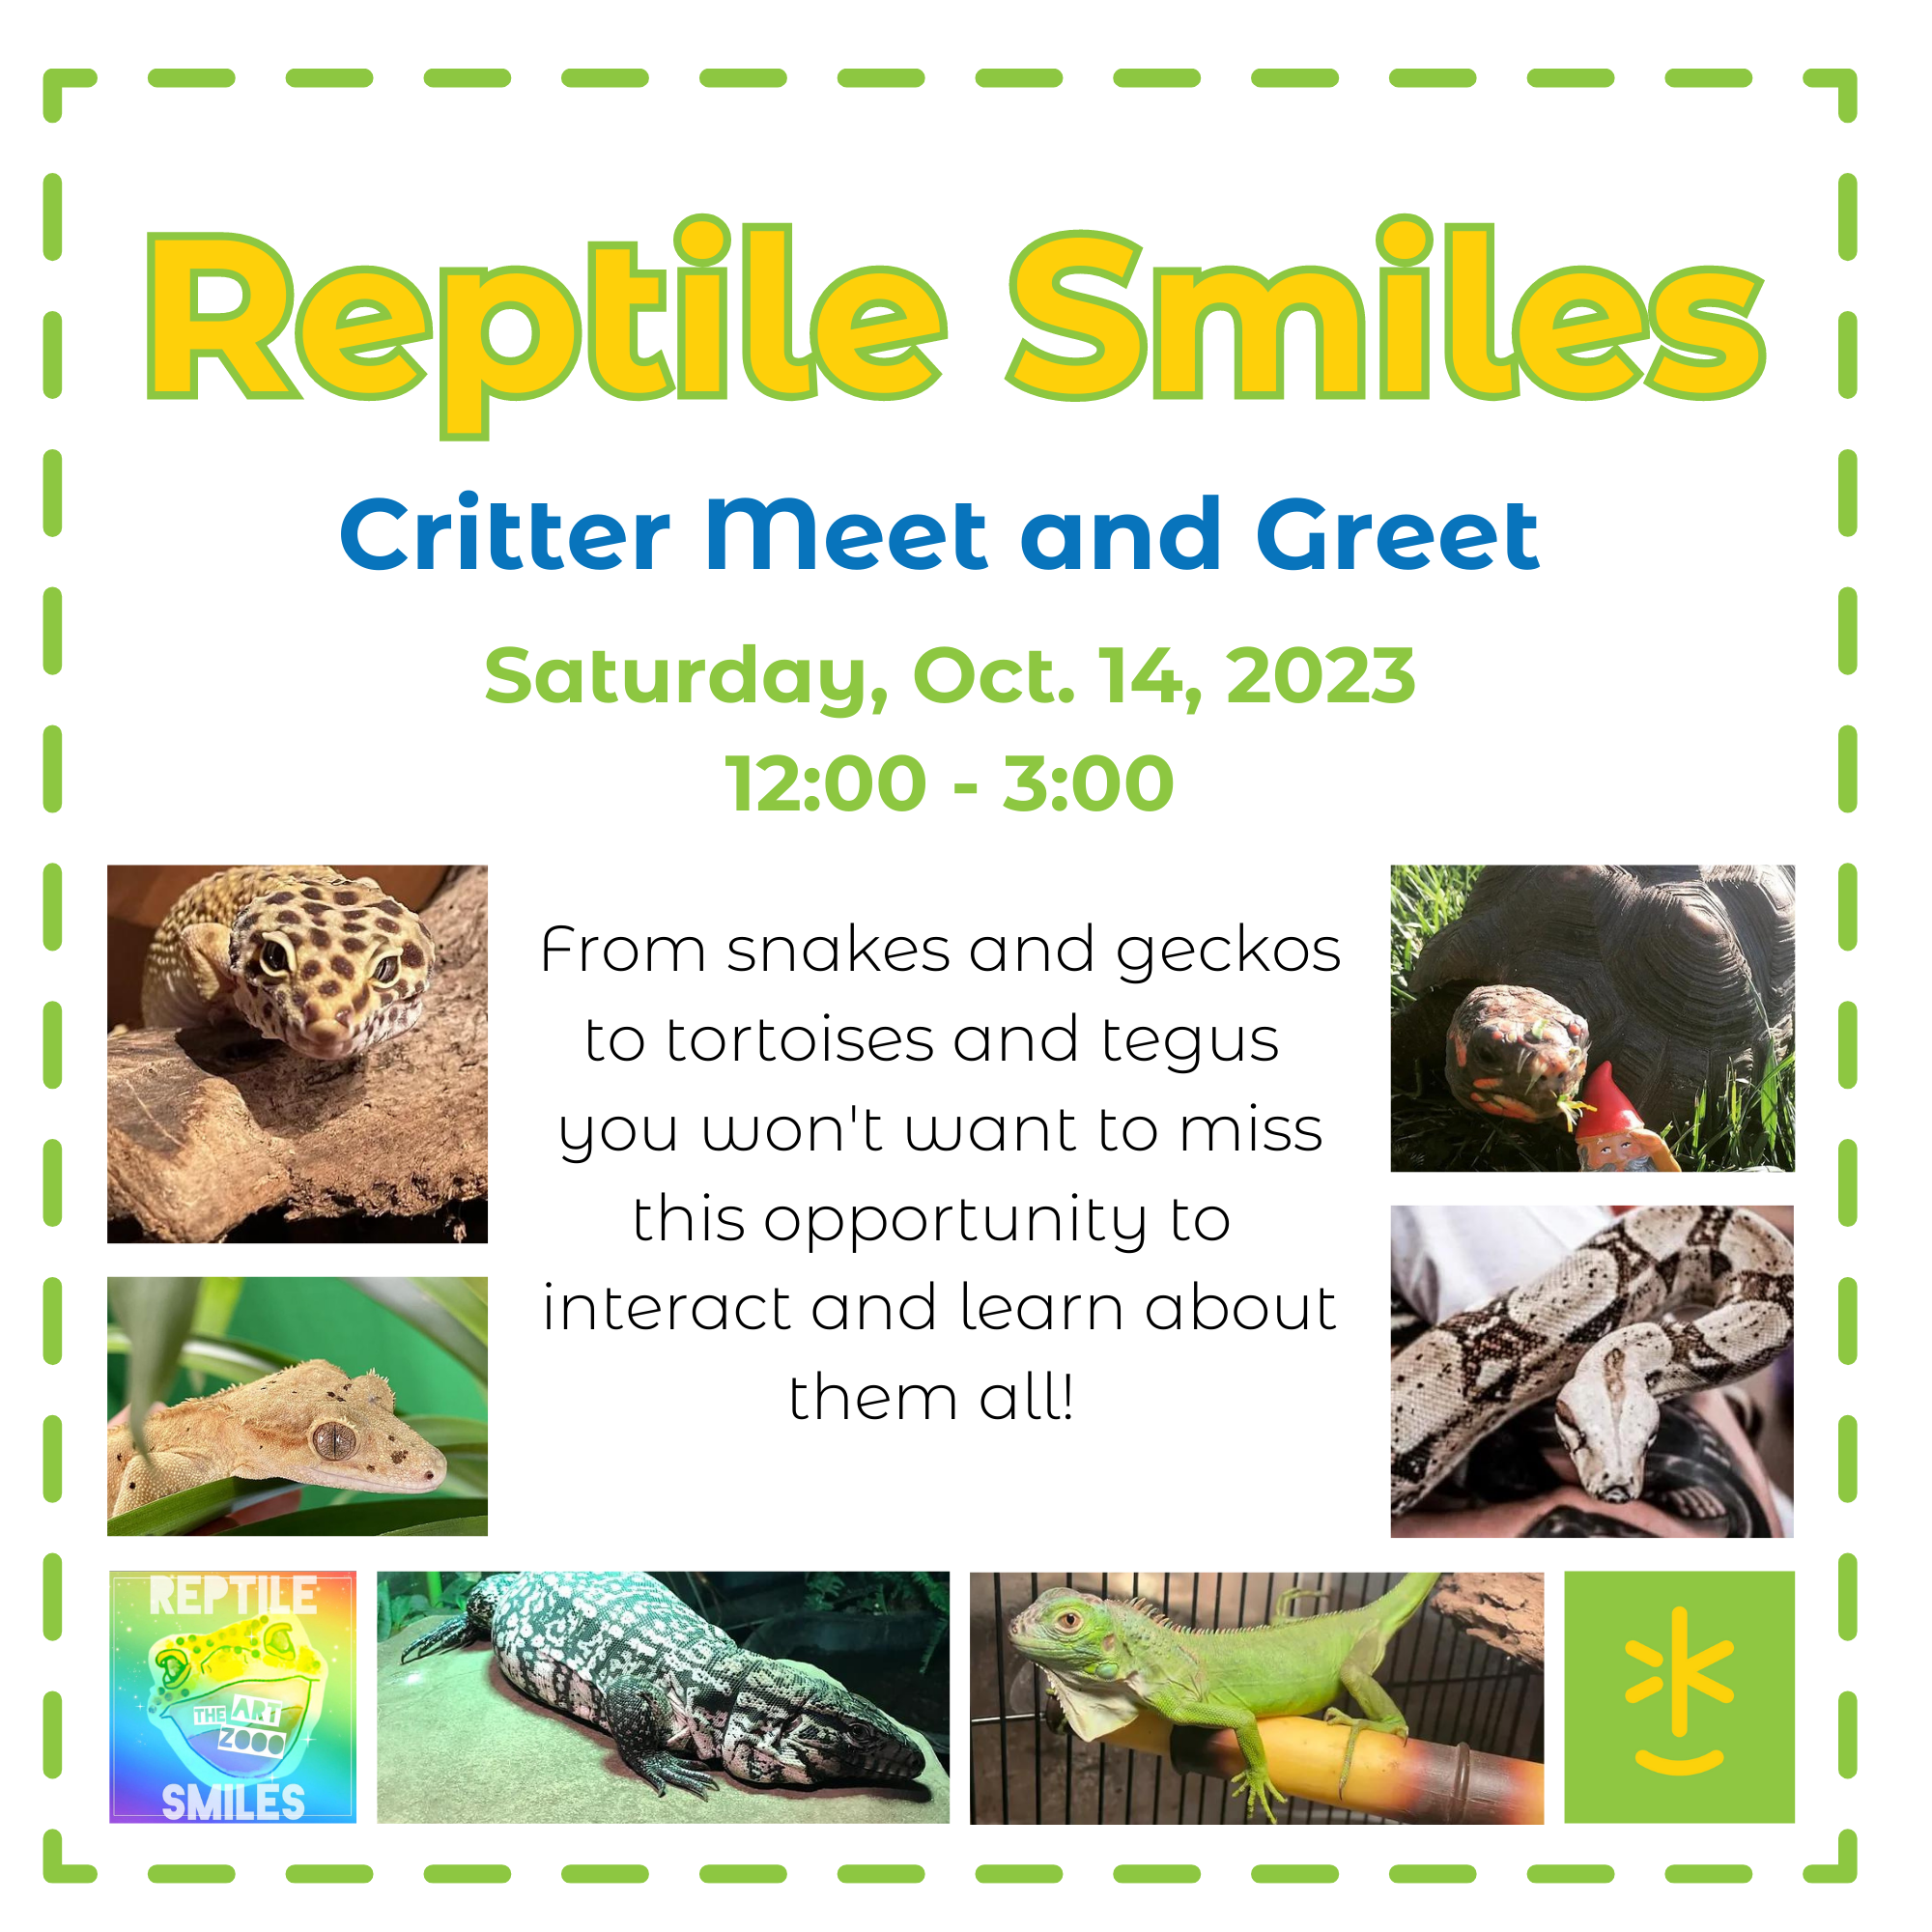 Reptile Smiles: Meet and Greet